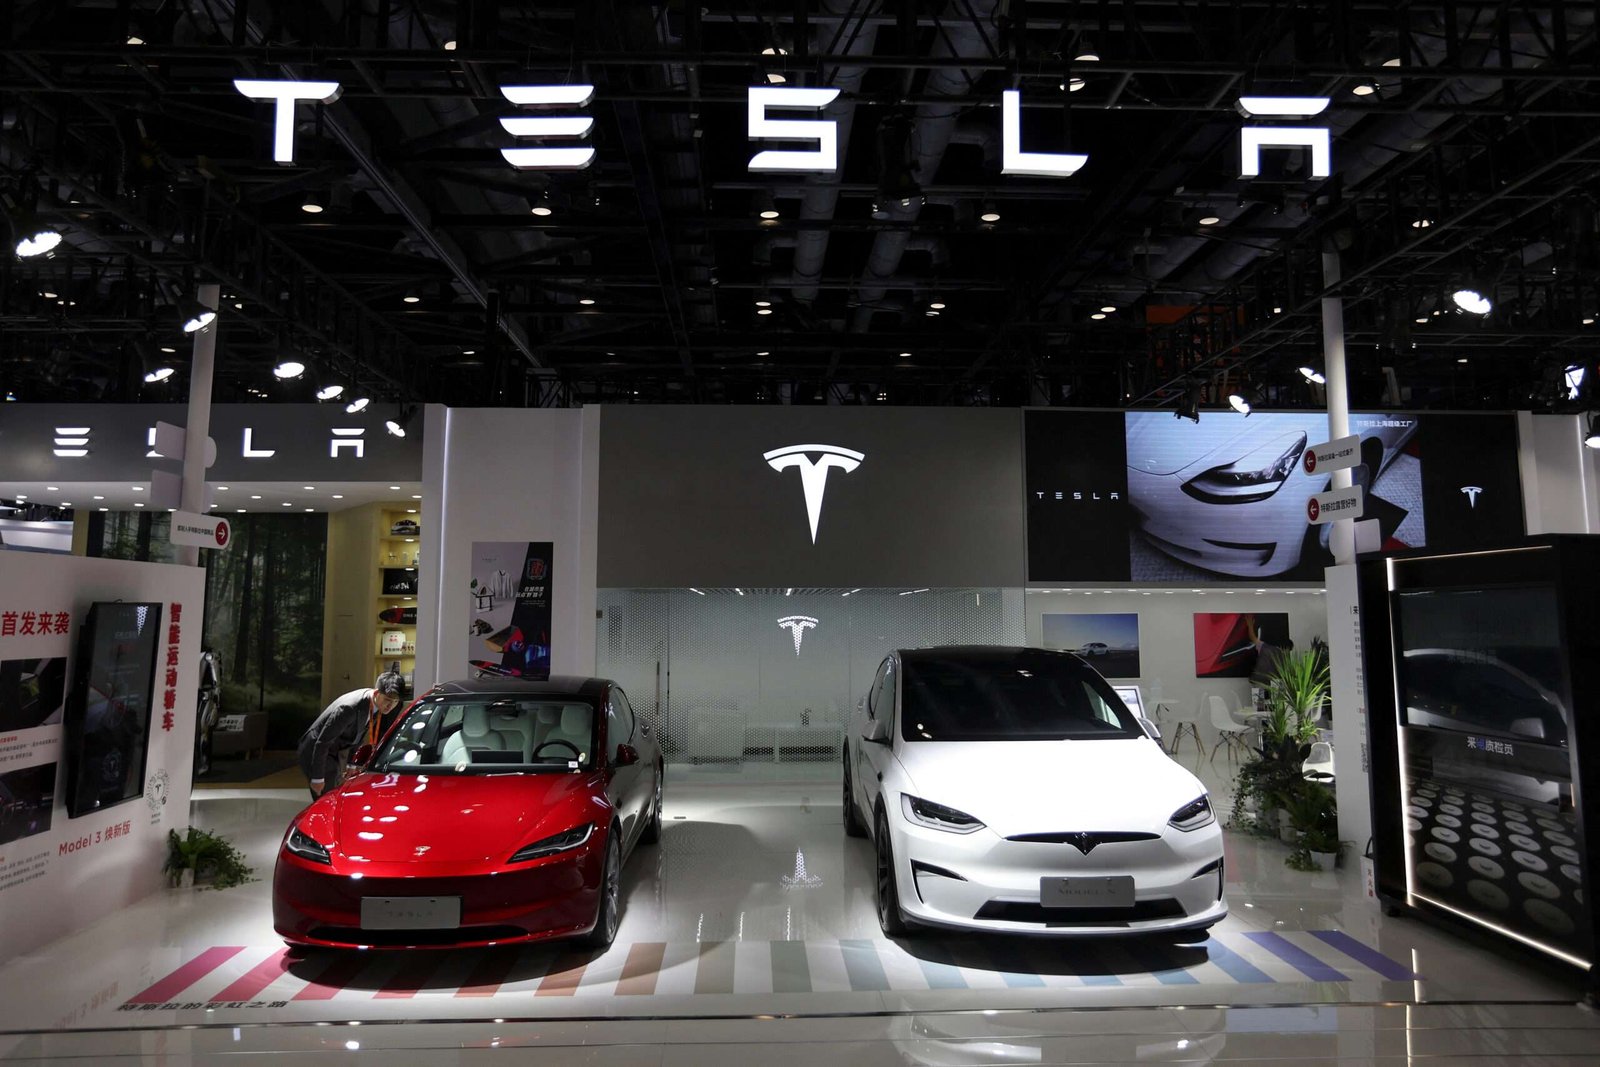 Tesla Achieved a Record Number of Car Deliveries in the Fourth Quarter, but China’s Byd Surpassed Them to Claim the Top Spot in the Electric Vehicle (EV) Market